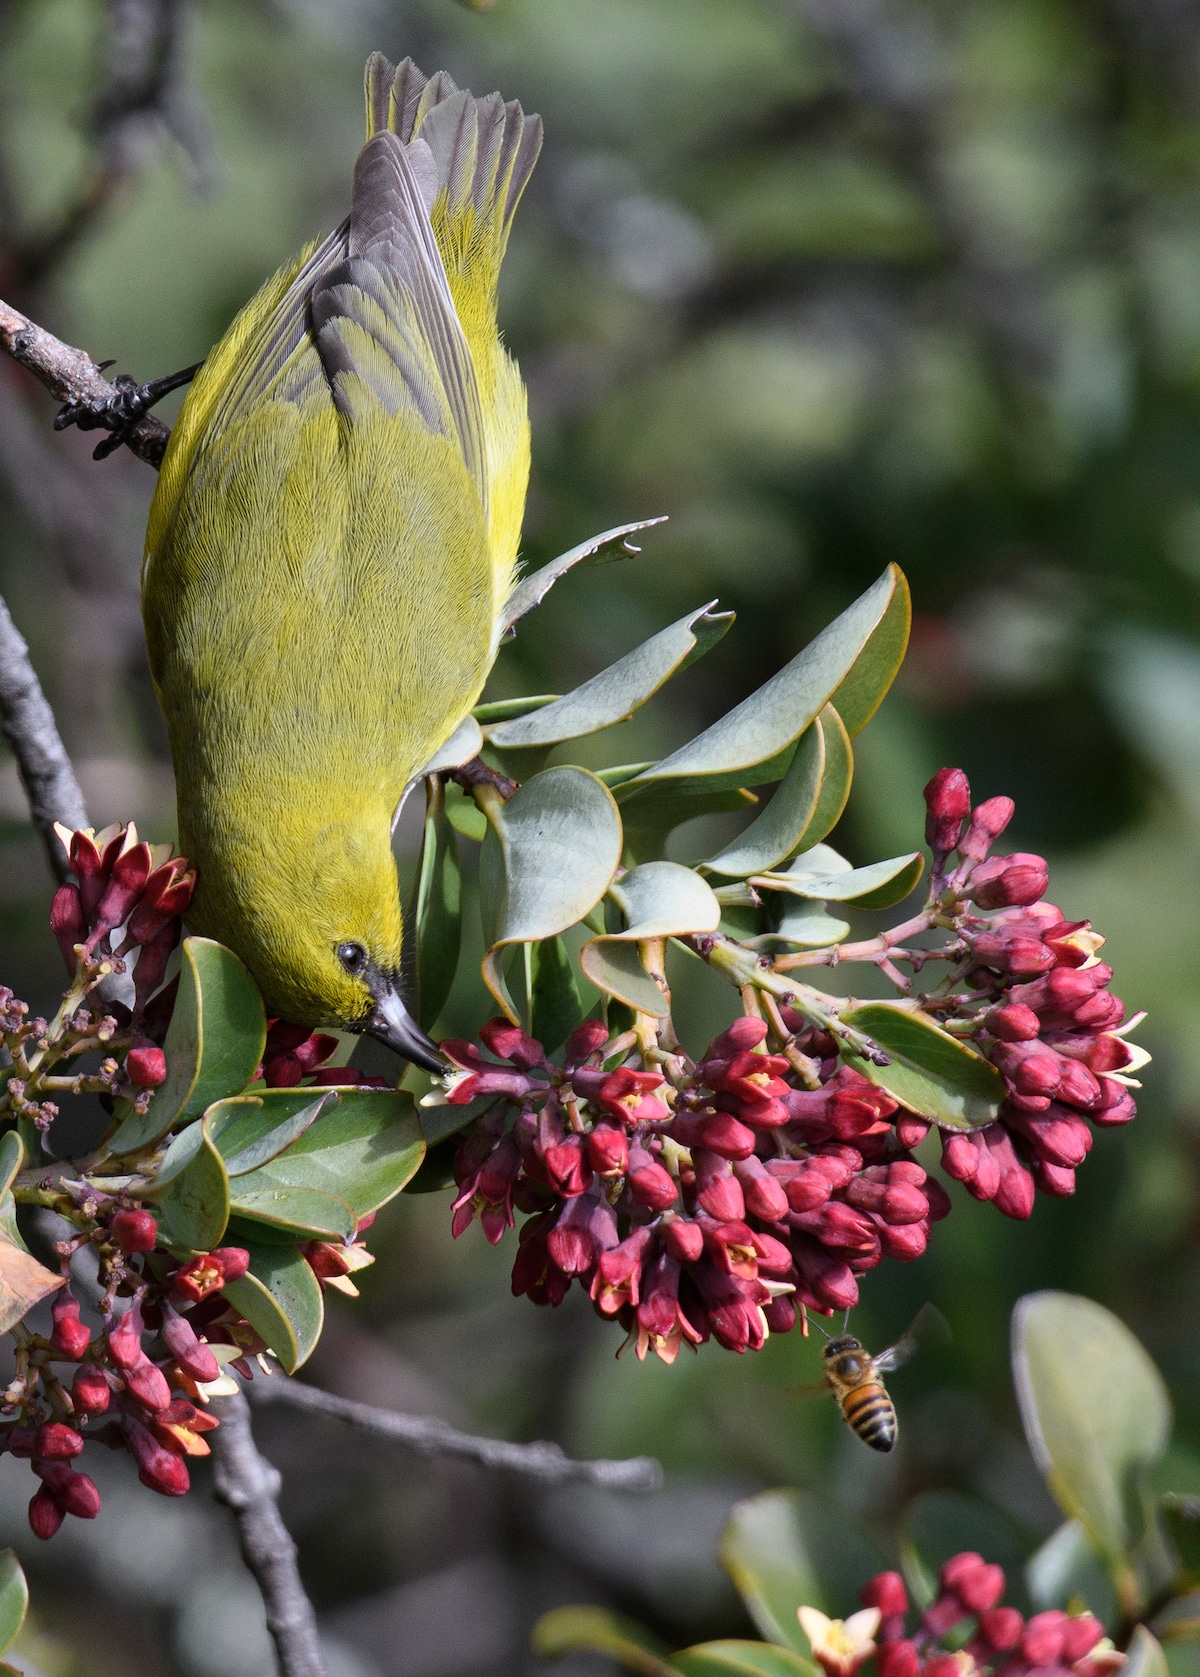 A Hawai‘i ‘Amakihi drinks nectar upside down from the pink, clustered flowers of the sandalwood tree